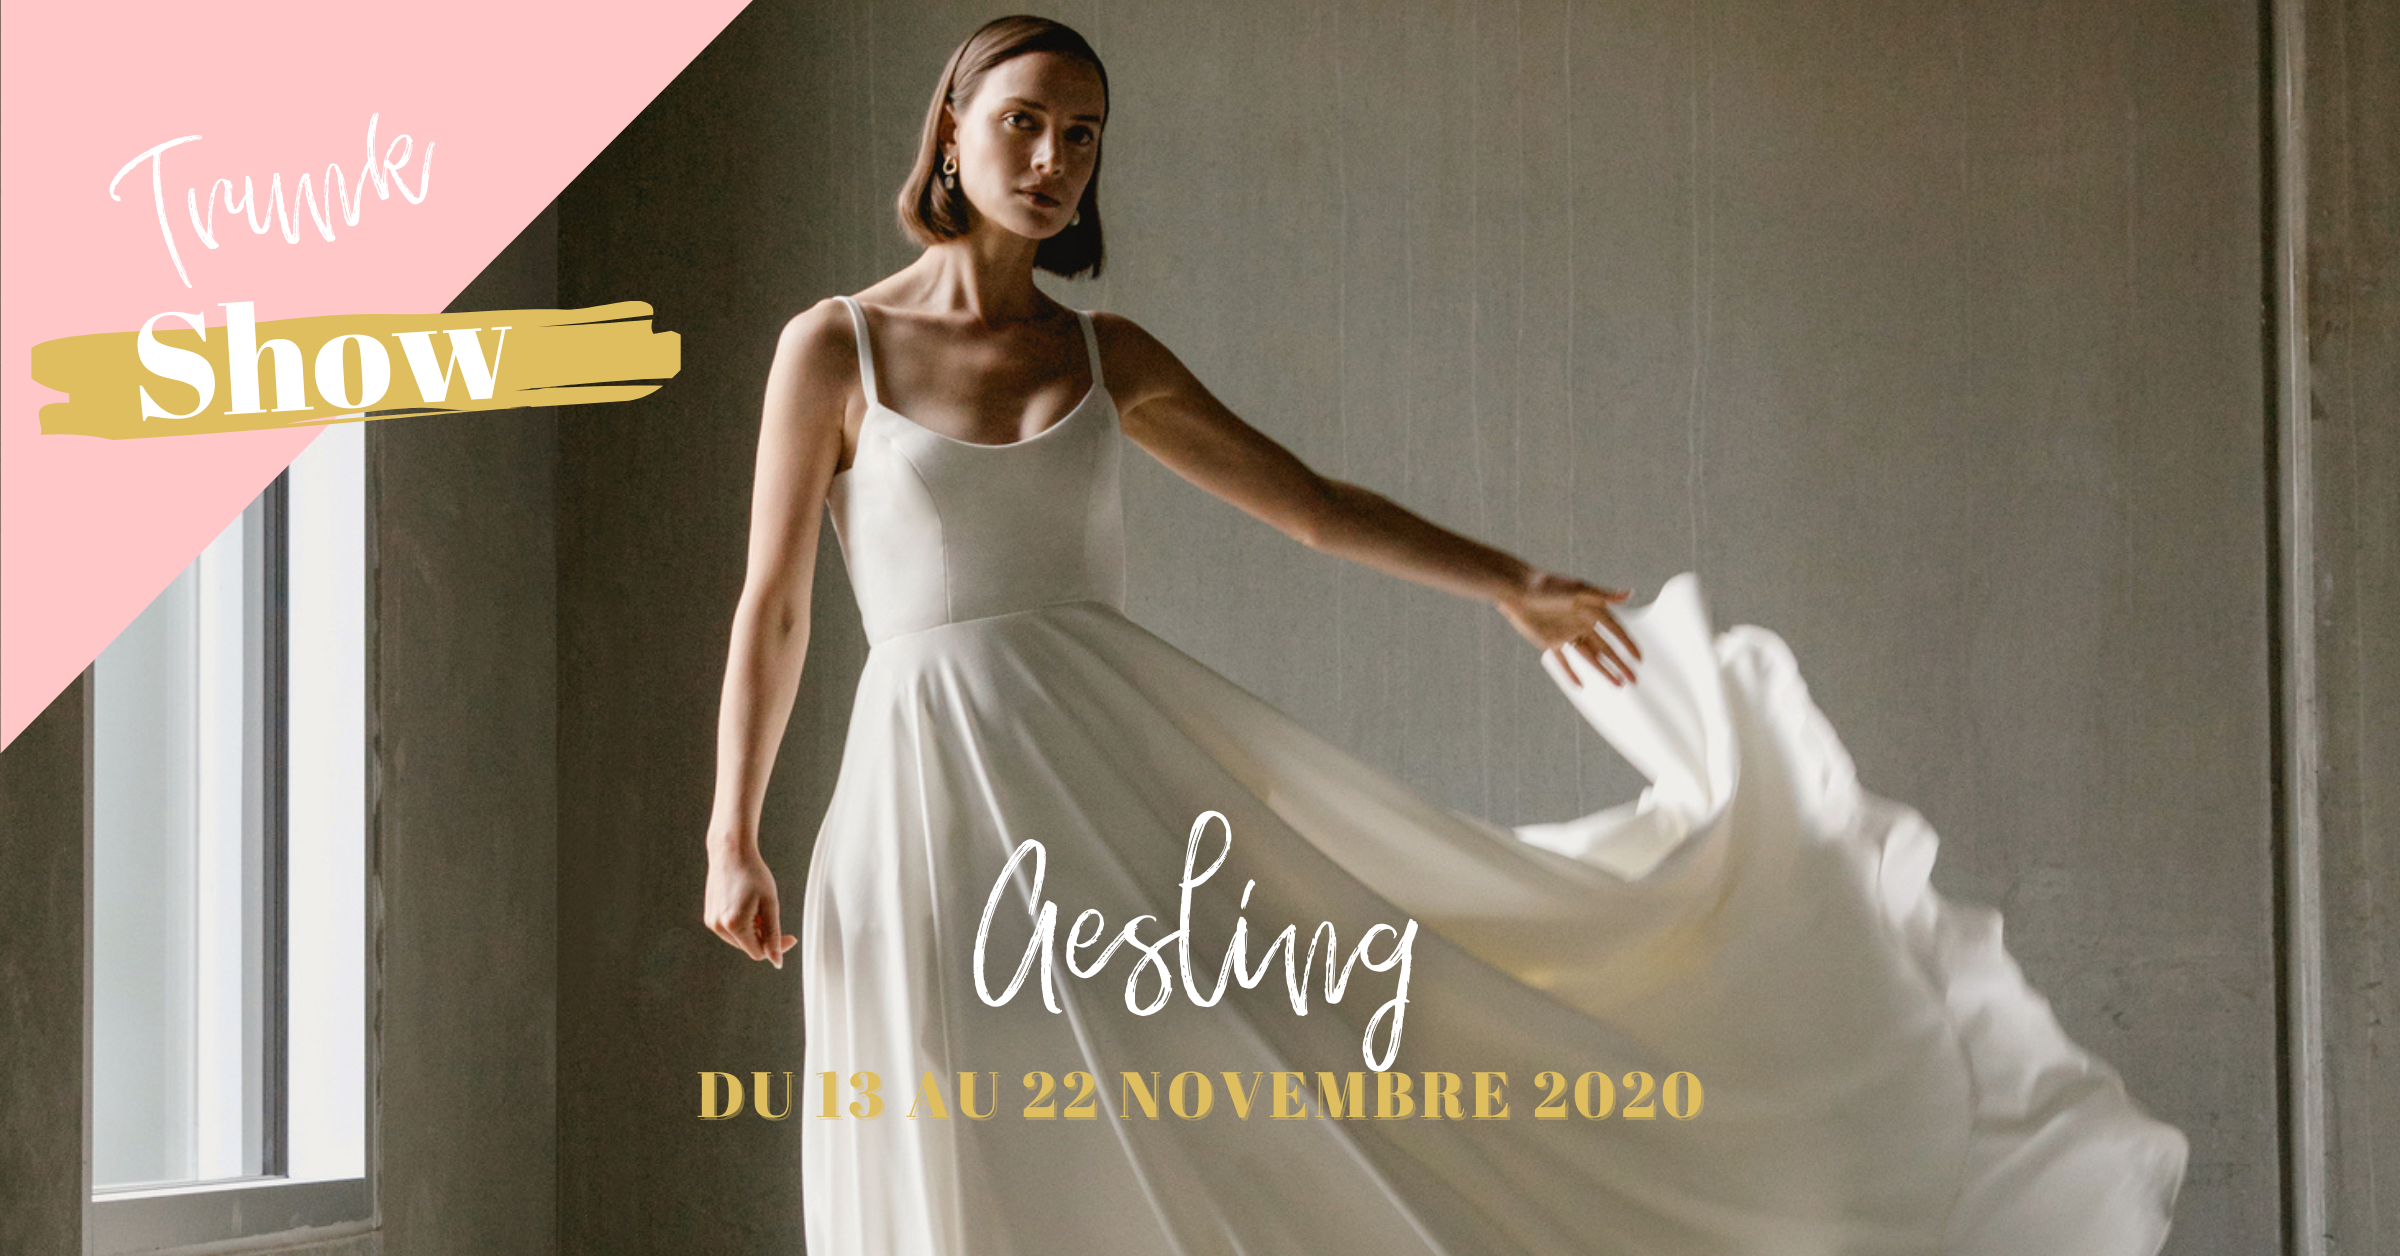 Aesling from 13th to 22nd November 2020